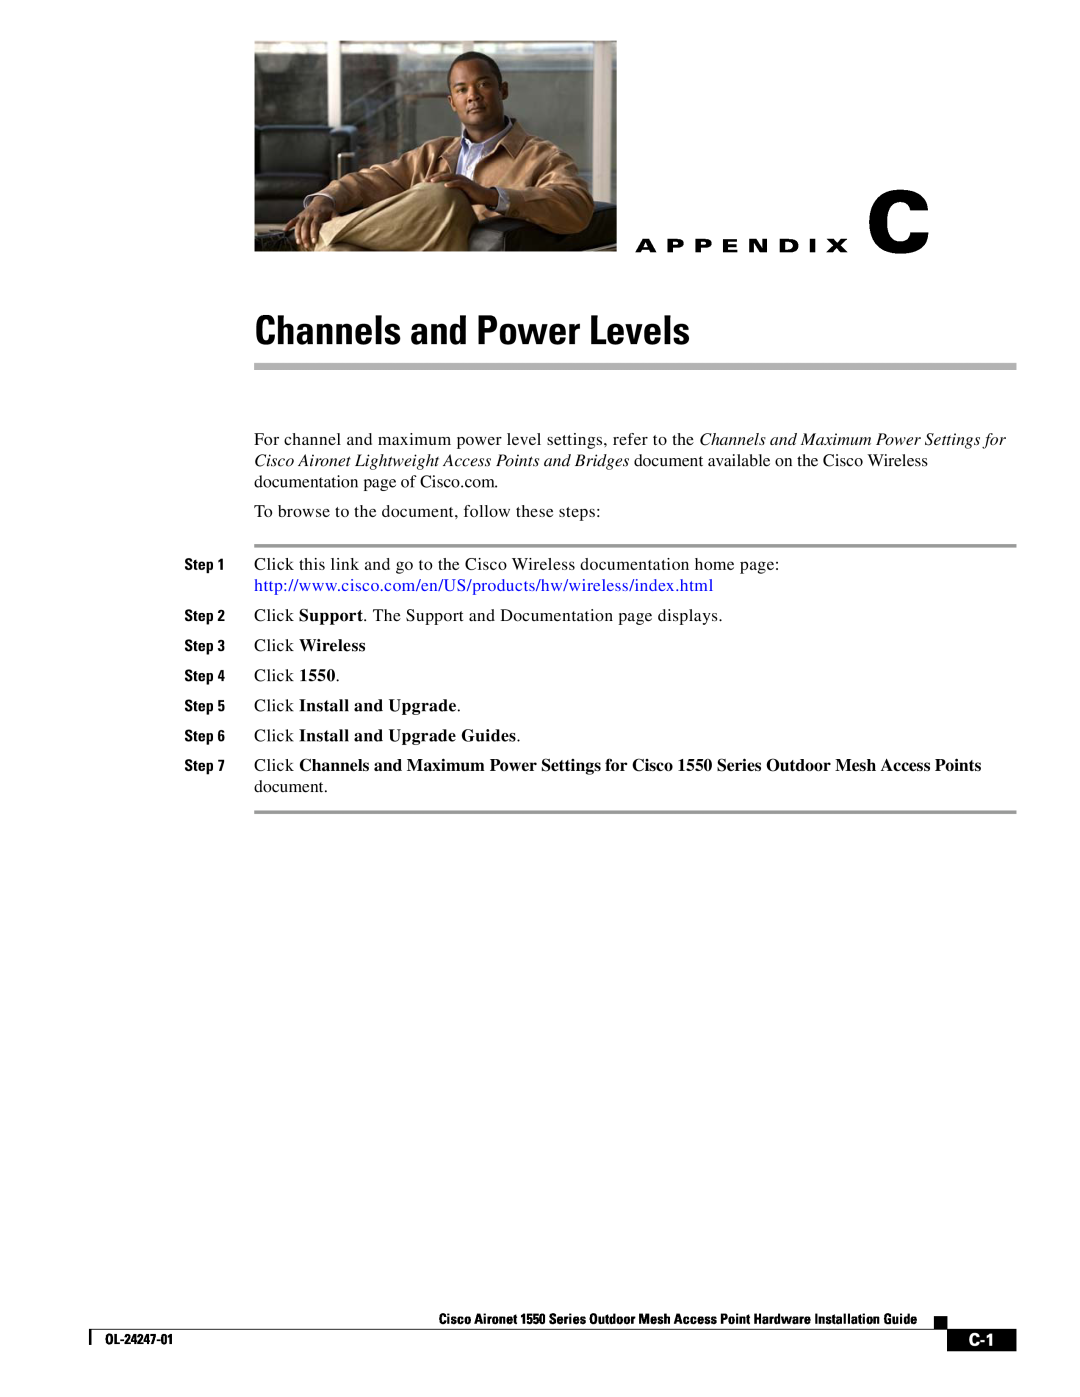 Cisco Systems AIRPWRINJ15002 manual Channels and Power Levels, A P P E N D I X C, Click Wireless, Click Install and Upgrade 